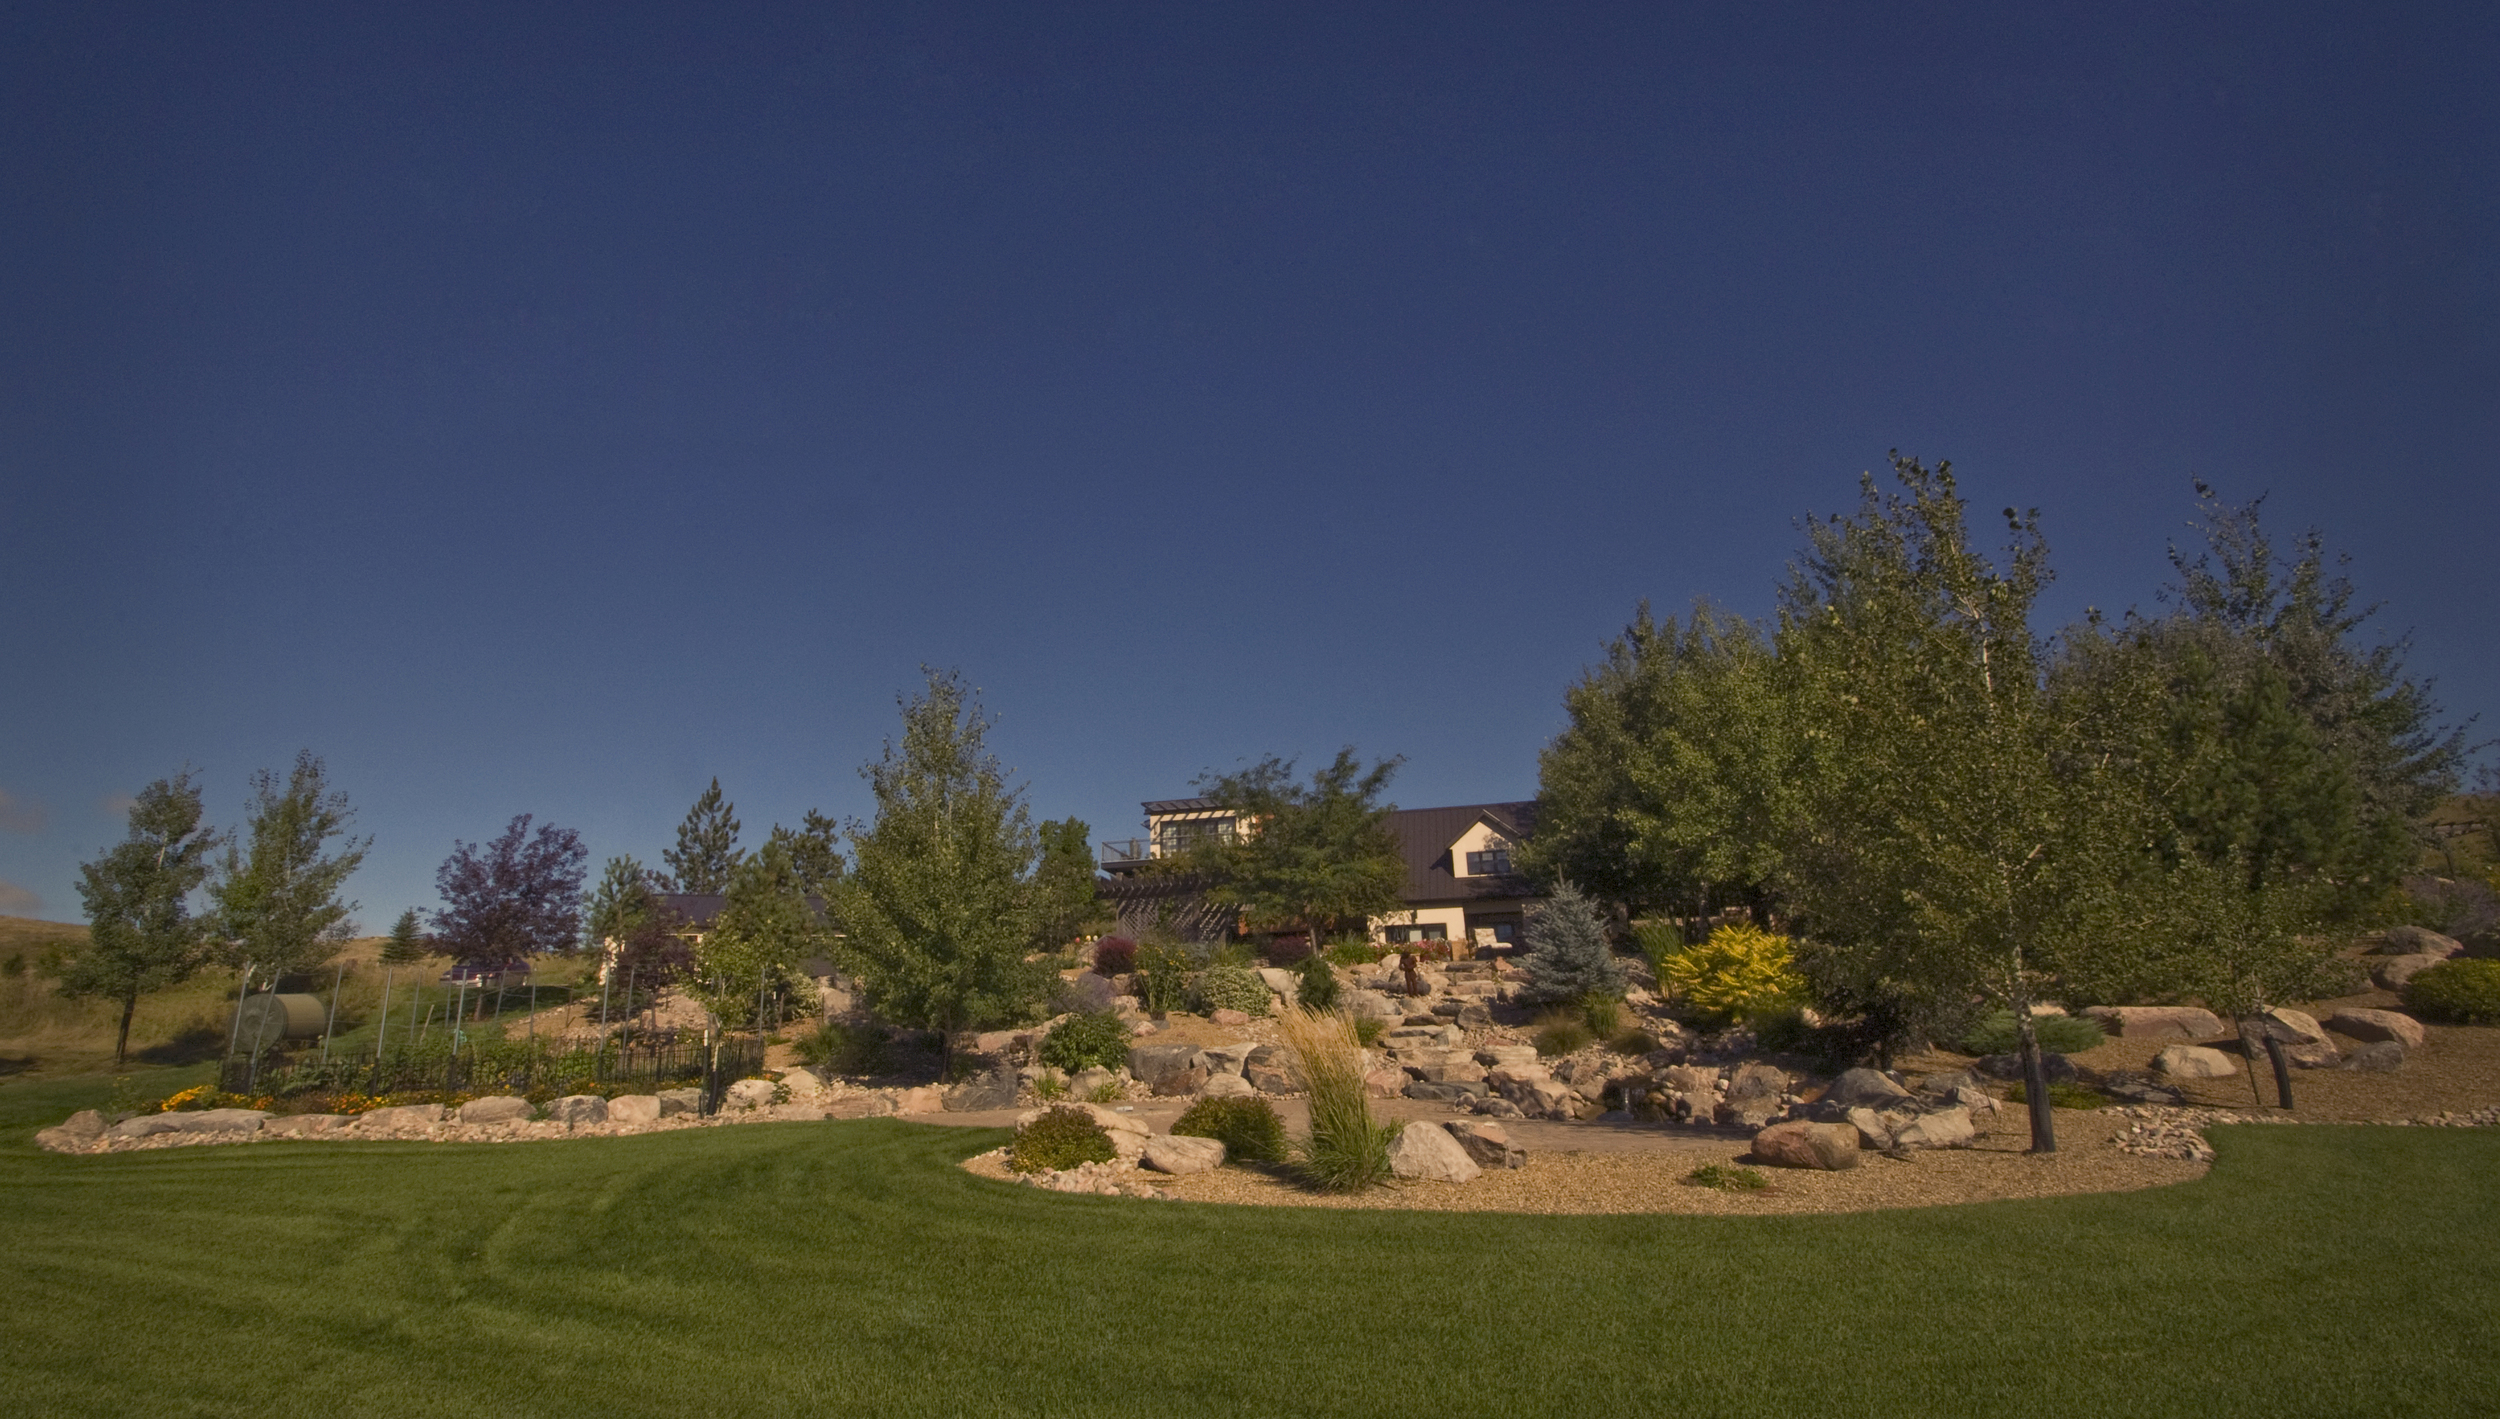  Large rock beds with plantings throughout a backyard. In the center boulder steps cut a path down to a paver patio. 